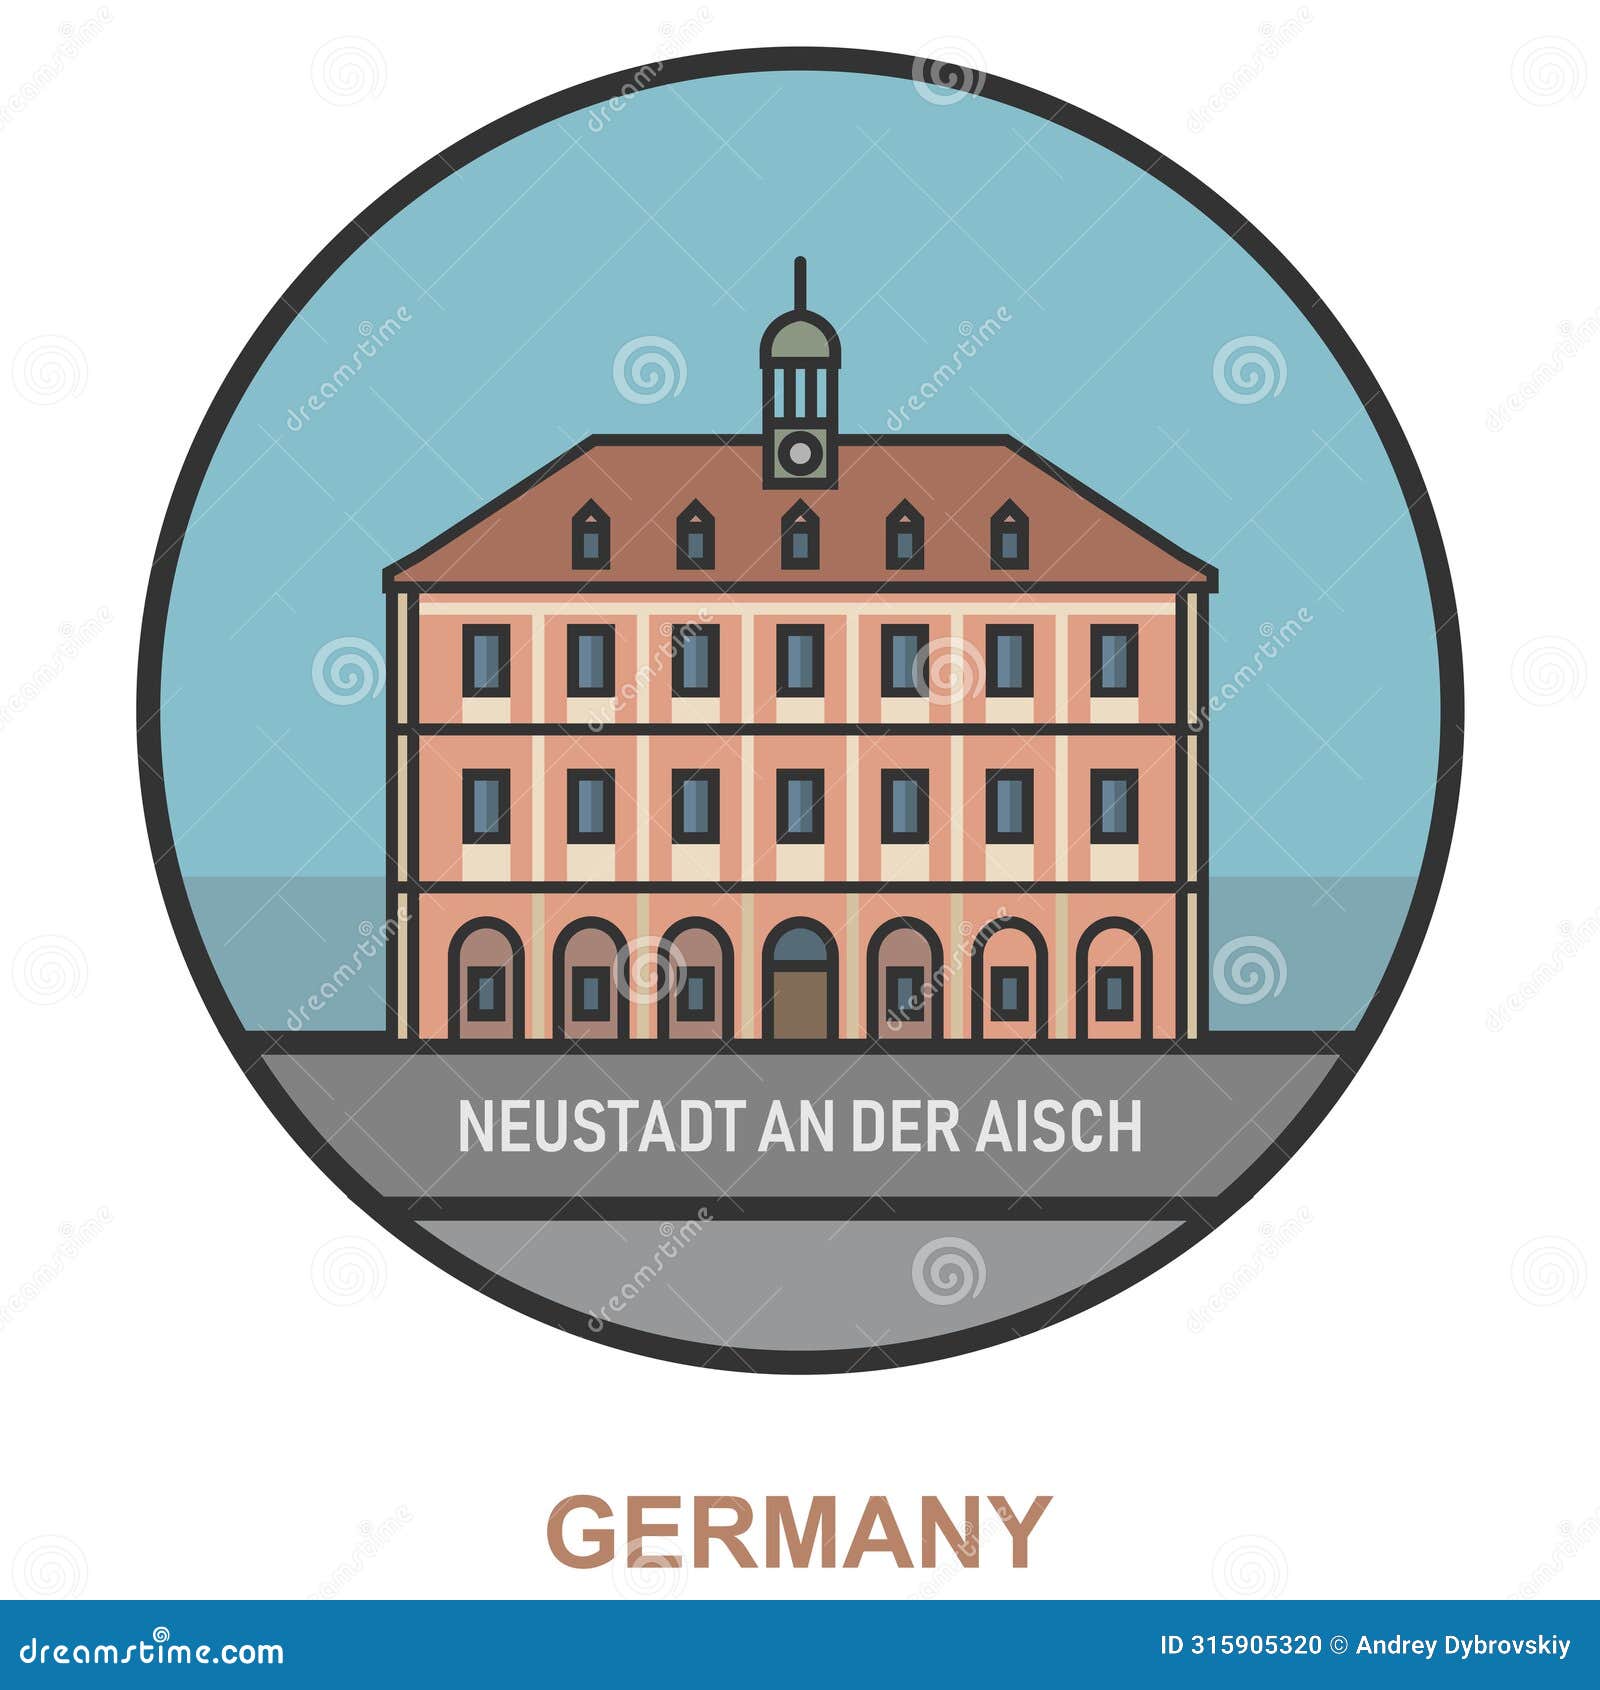 neustadt an der aisch. cities and towns in germany